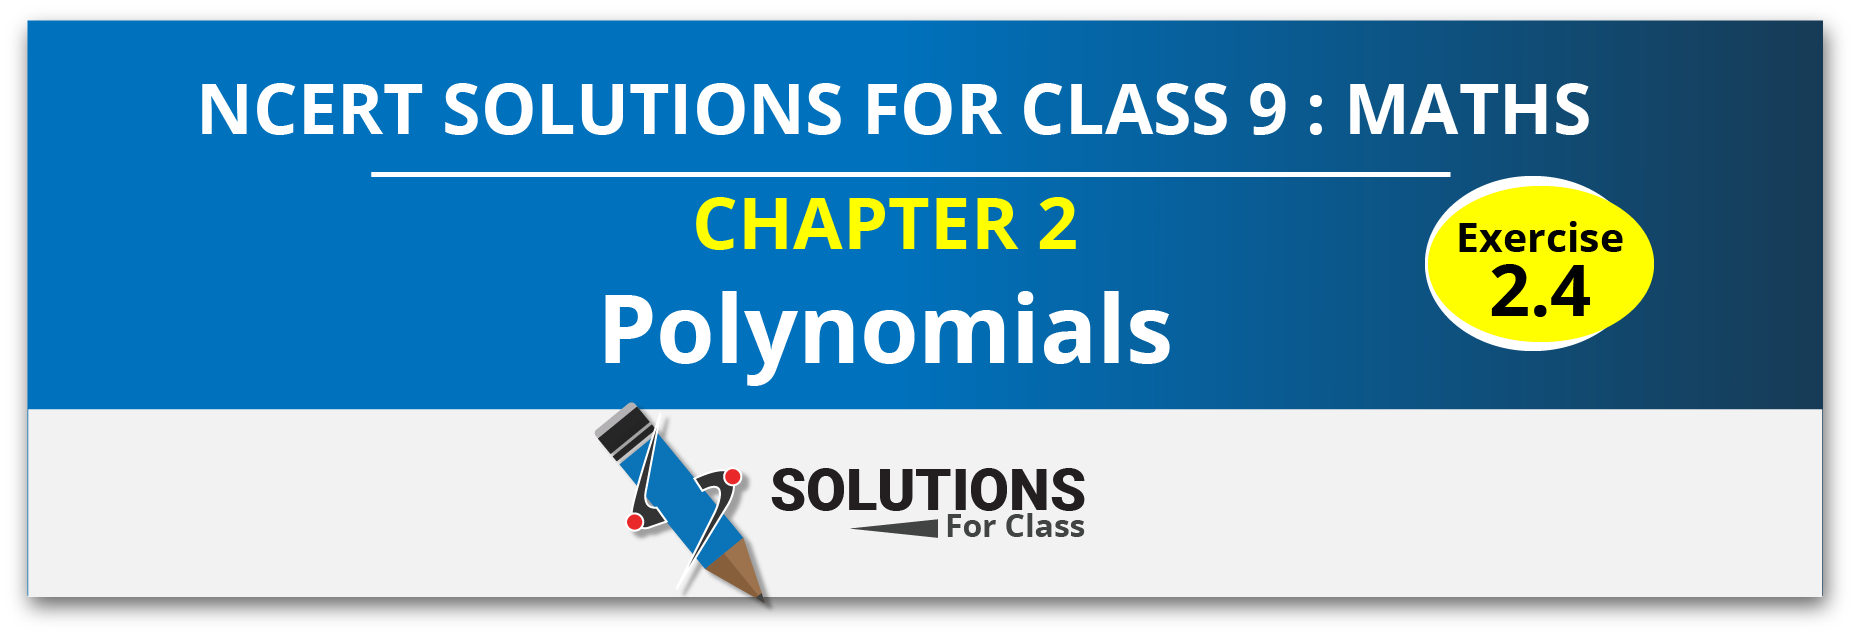 NCERT Solution For Class 9, Maths, Chapter 2, Polynomials, Exercise 2.4